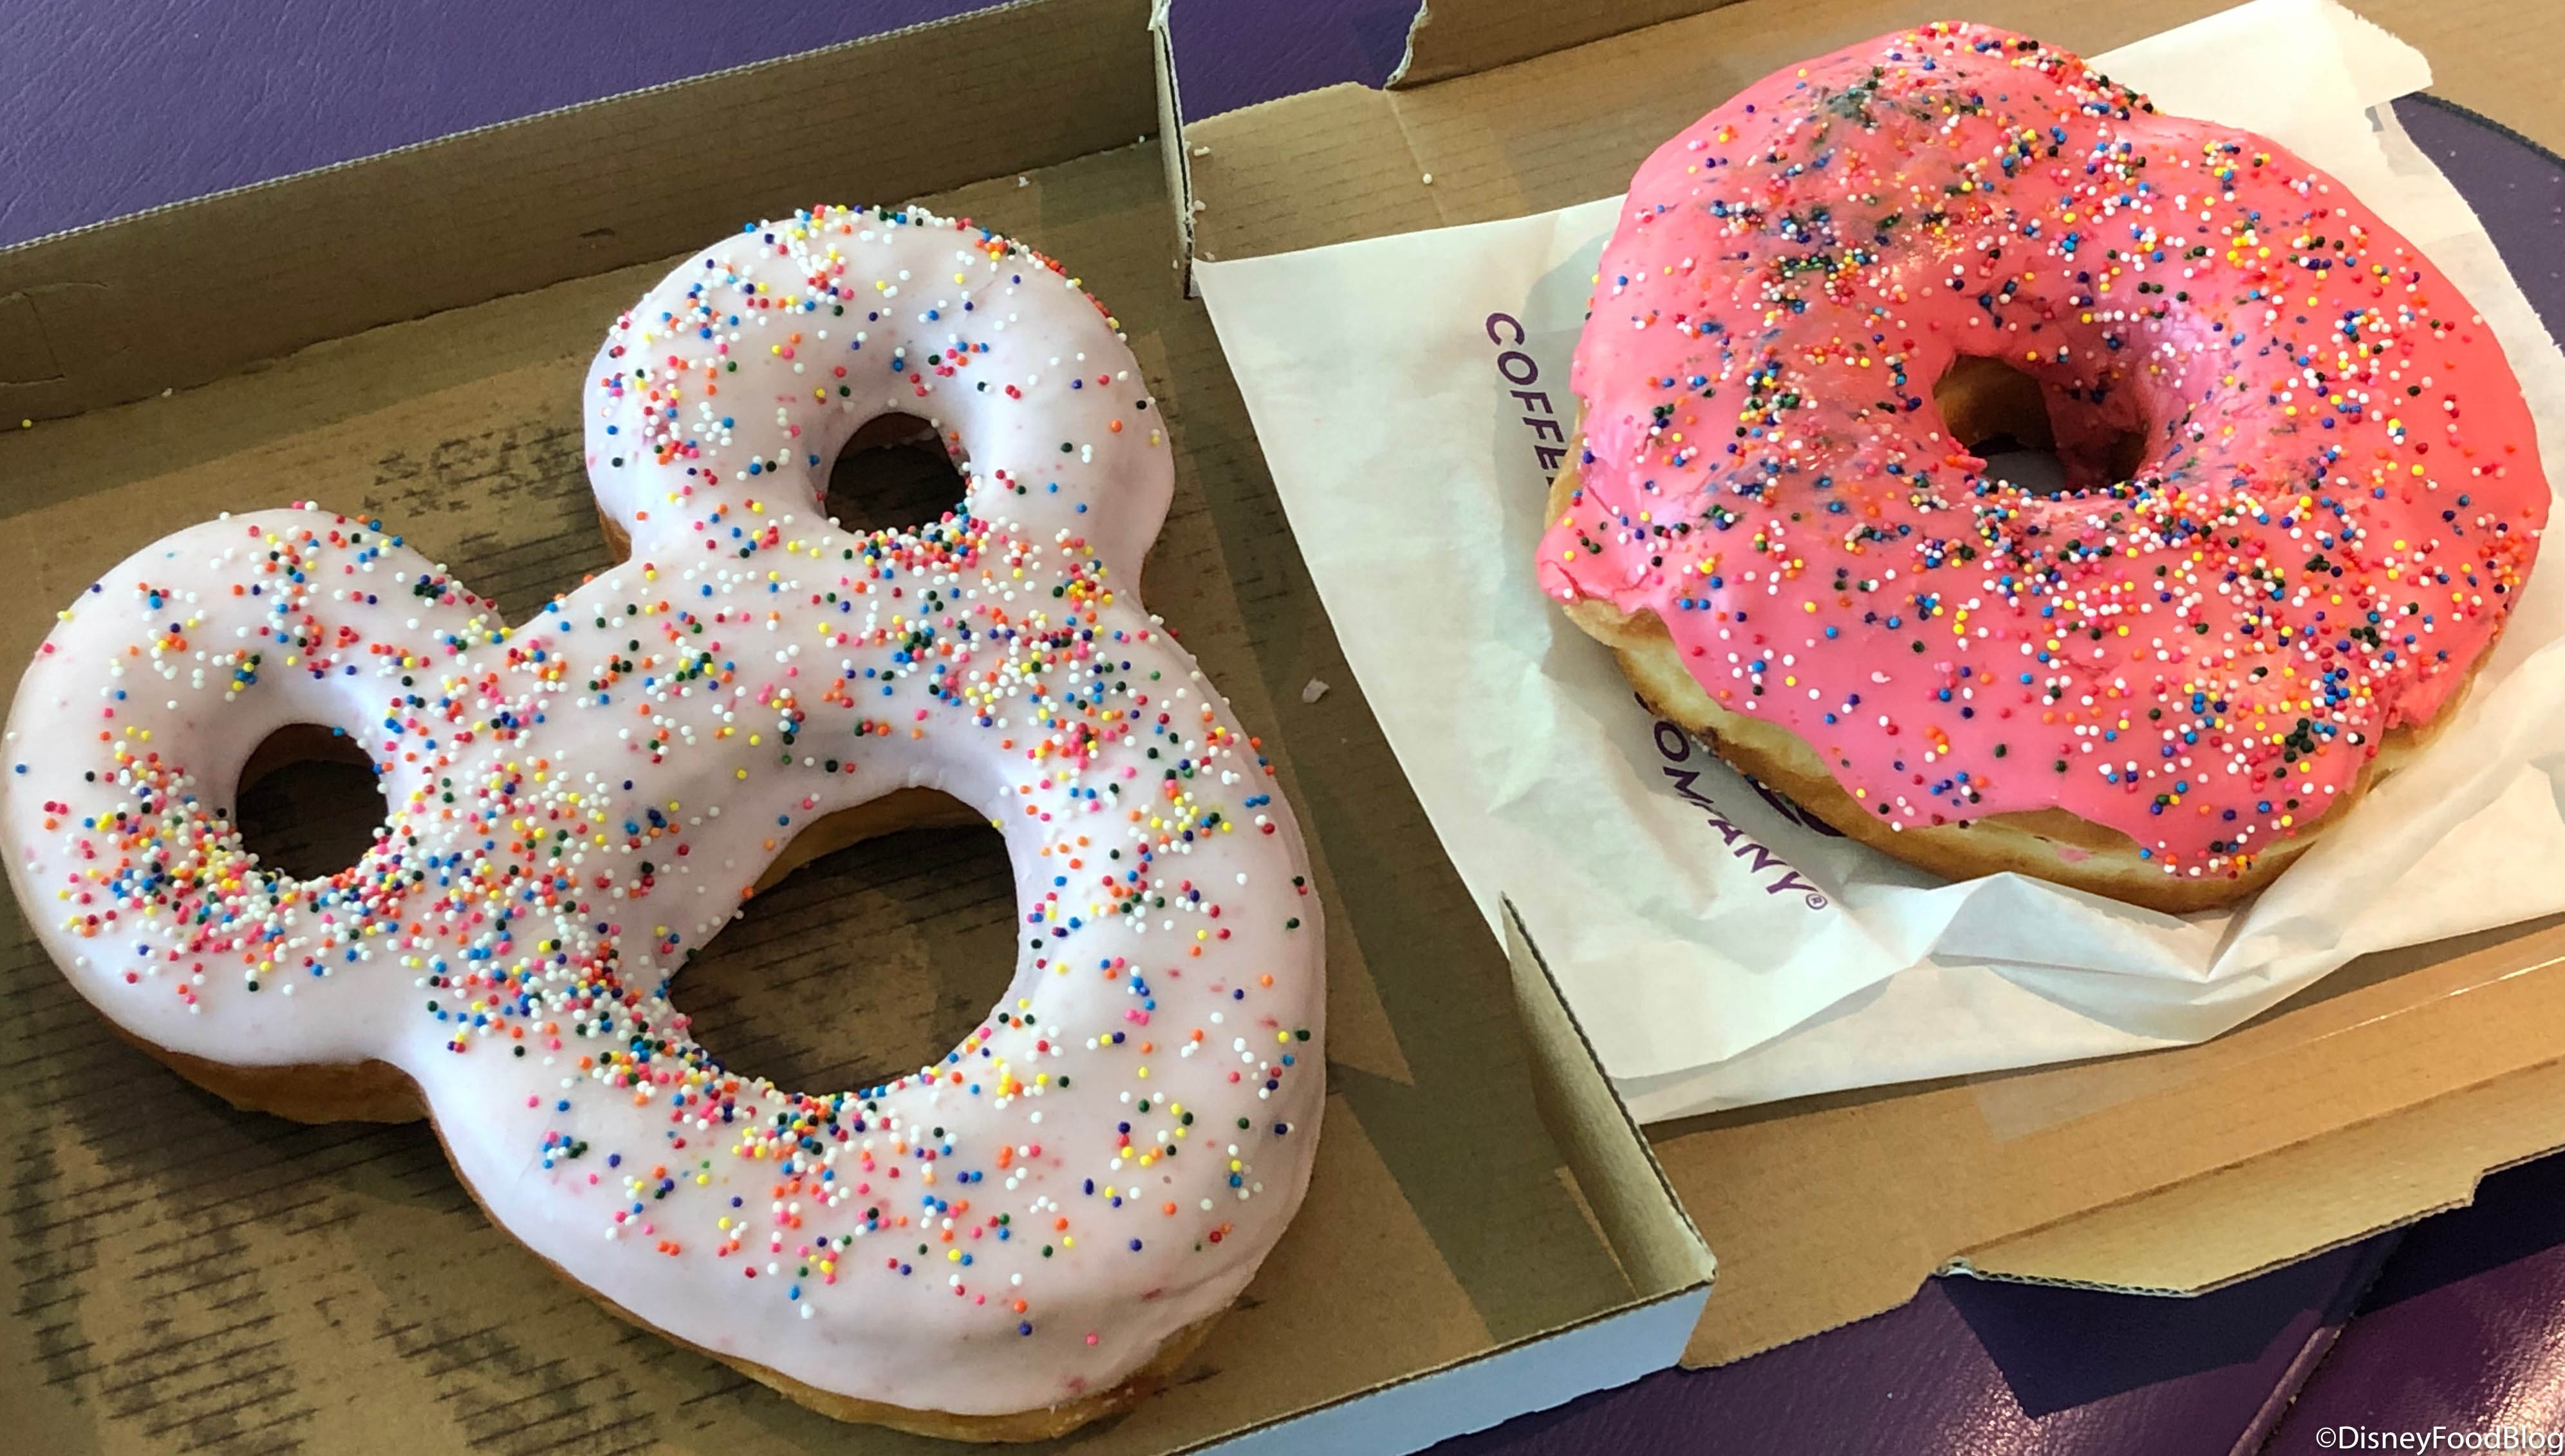 http://www.disneyfoodblog.com/wp-content/uploads/2019/05/Giant-Mickey-Donut-and-Giant-Joffreys-Donut-2_.jpg